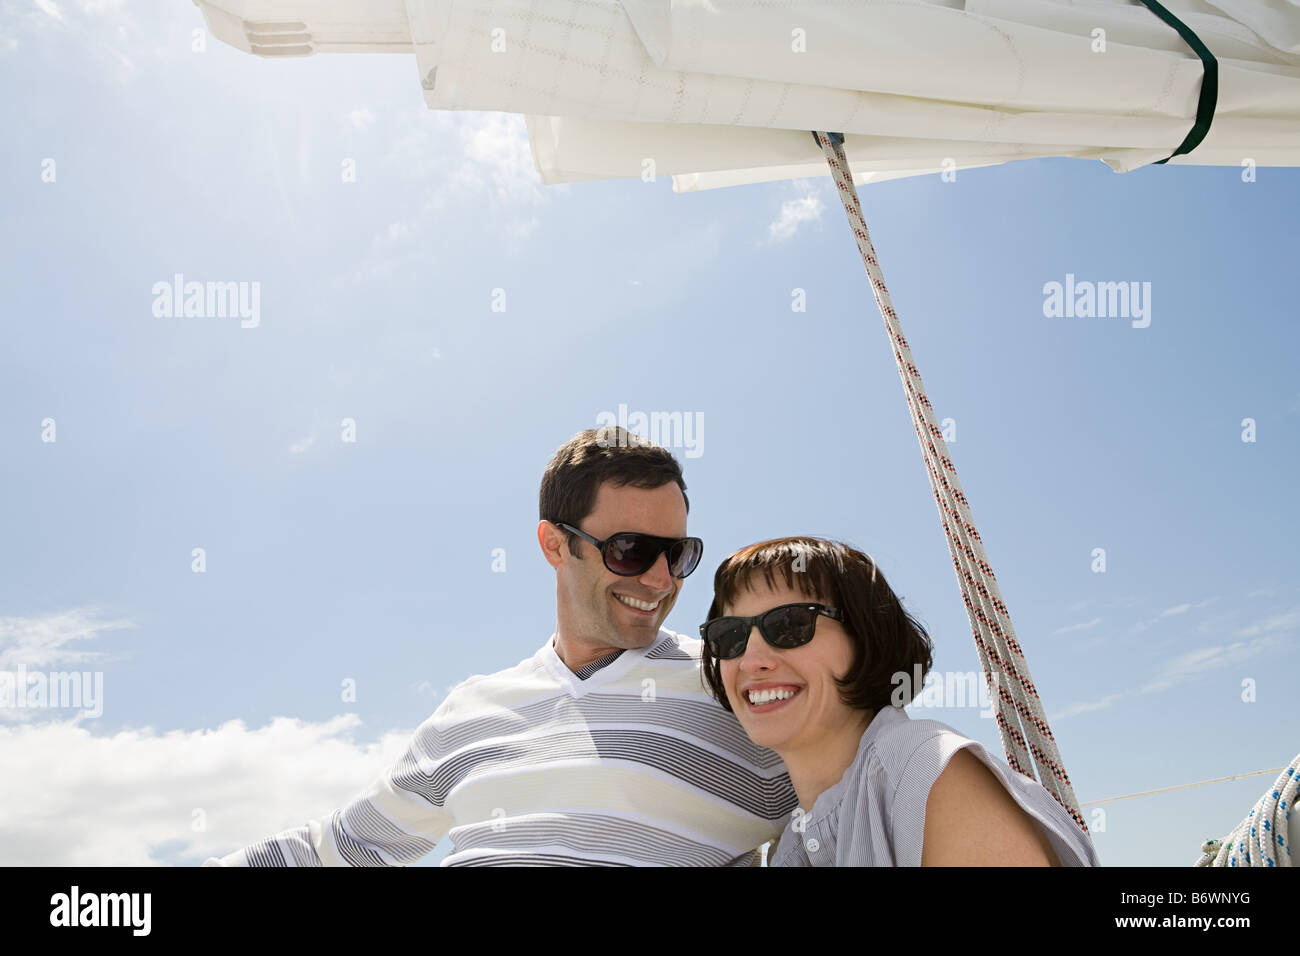 Smiling couple on a sailing boat Stock Photo